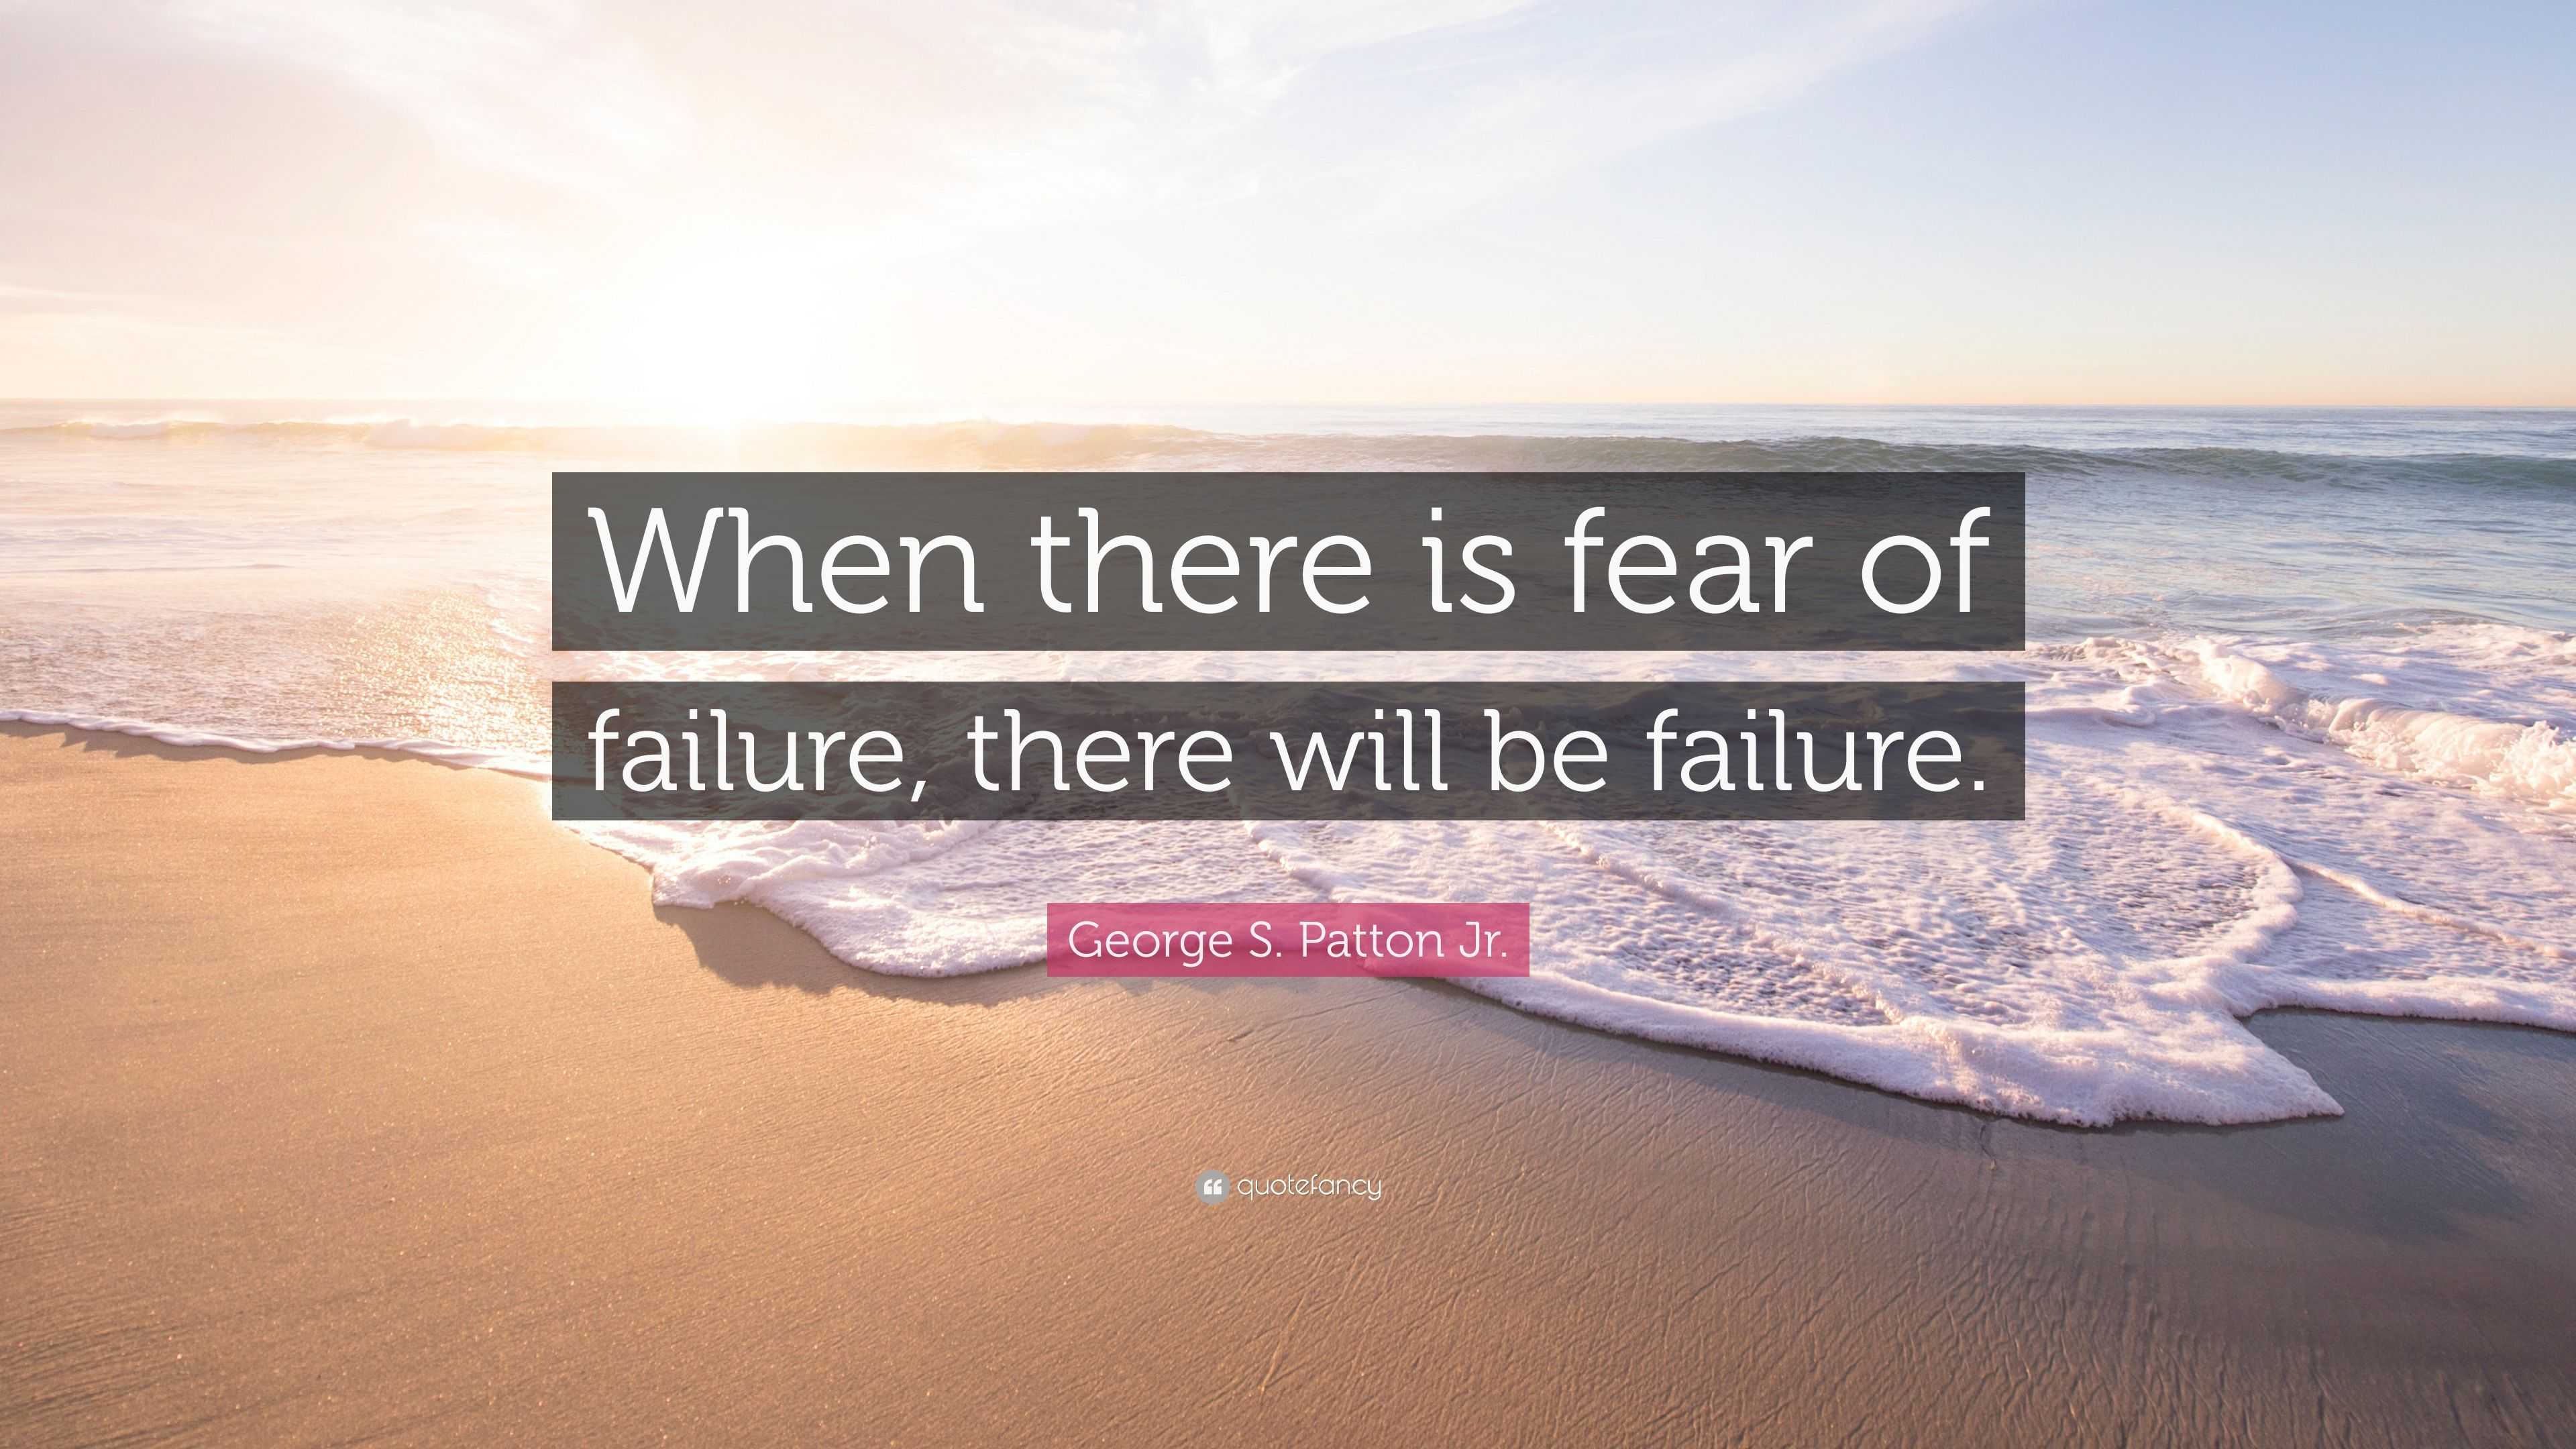 George S. Patton Jr. Quote: “When there is fear of failure, there will